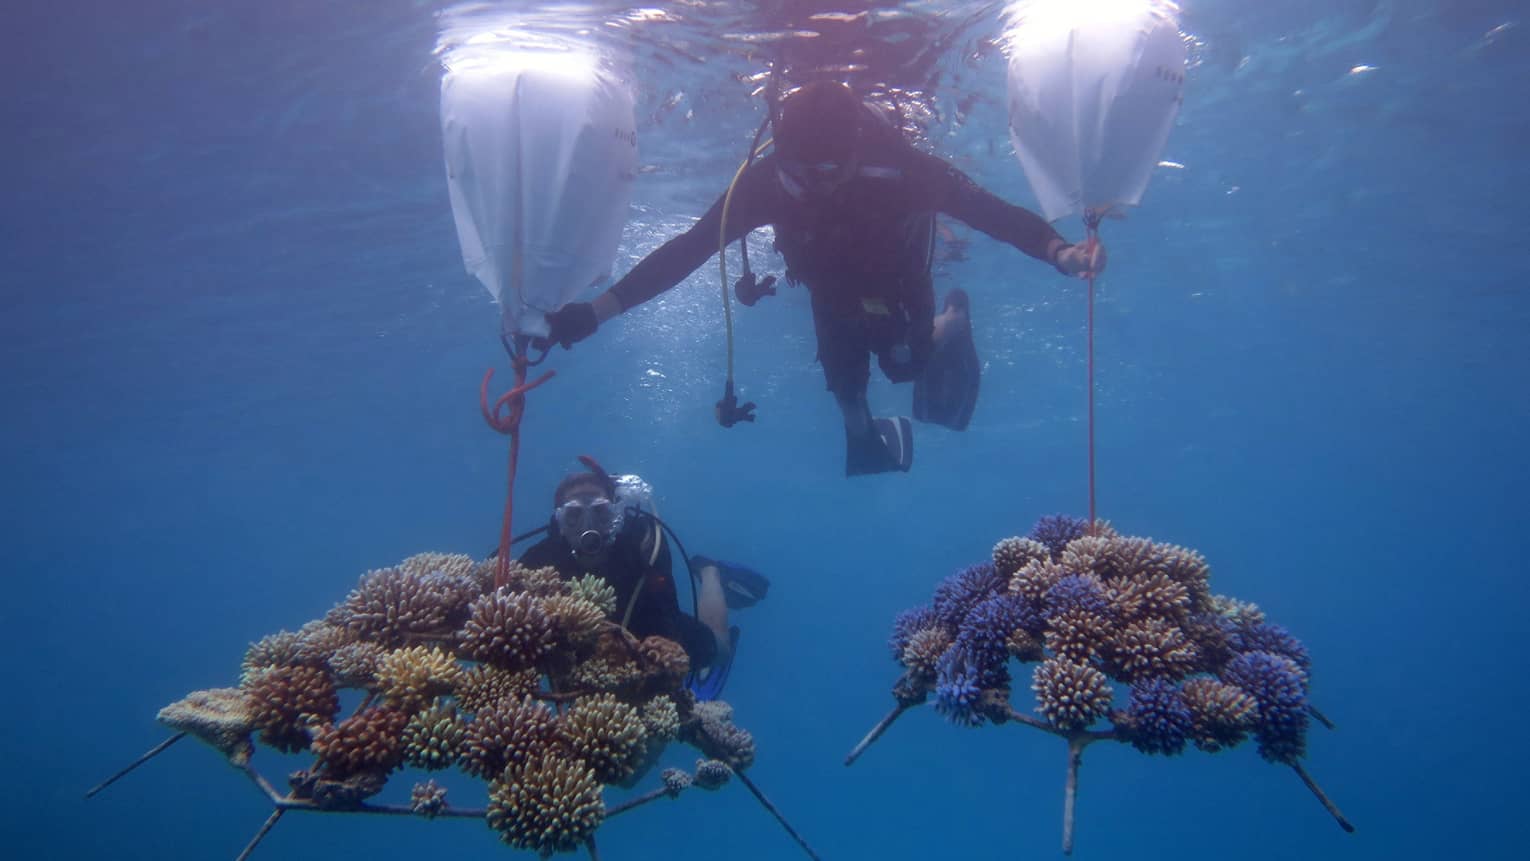 This image depicts two scuba divers in the waters near Four Seasons Resort Maldives at Kuda Huraa, transporting pieces of coral embedded onto coral frames. This image connects to ESG and preserving biodiversity at Four Seasons.